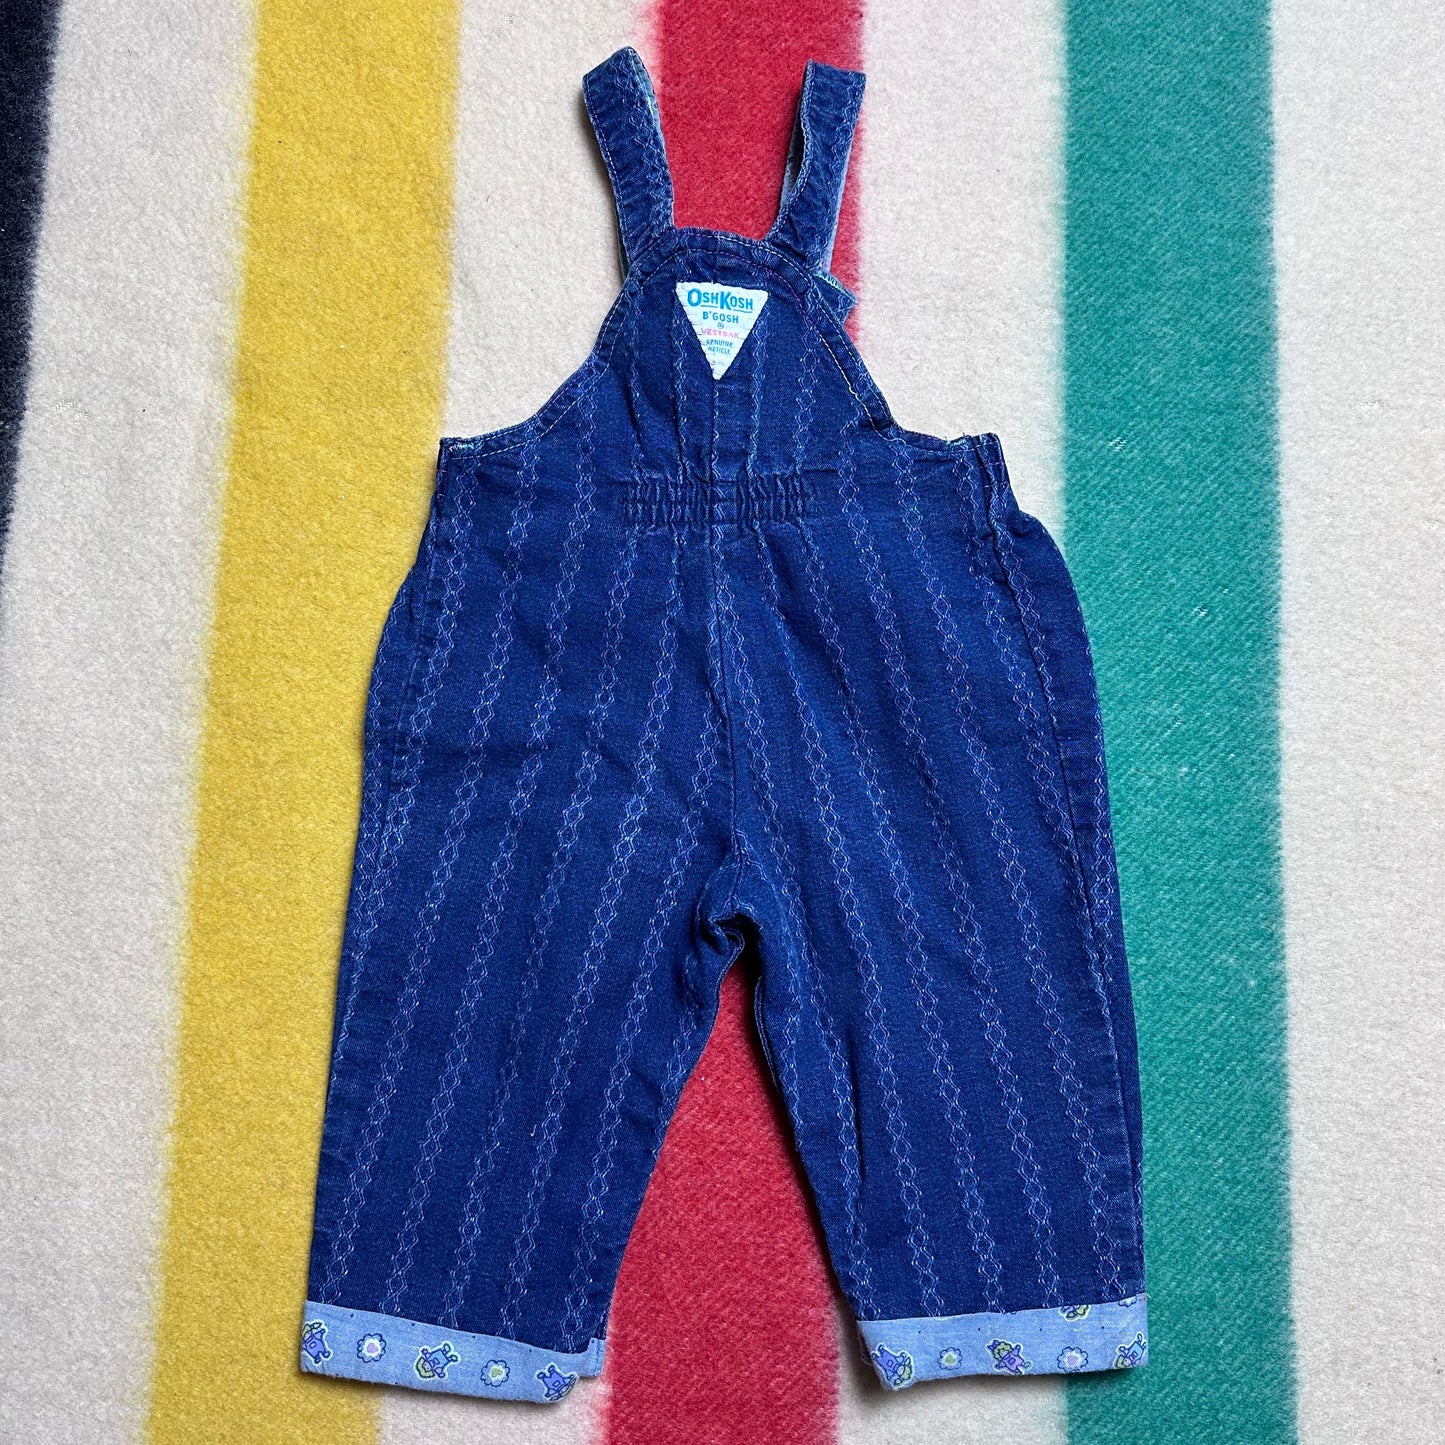 1980s/90s OshKosh Overalls, Size 12M, Stripe Denim with Neon Buttons, Dolls and Hearts Lining